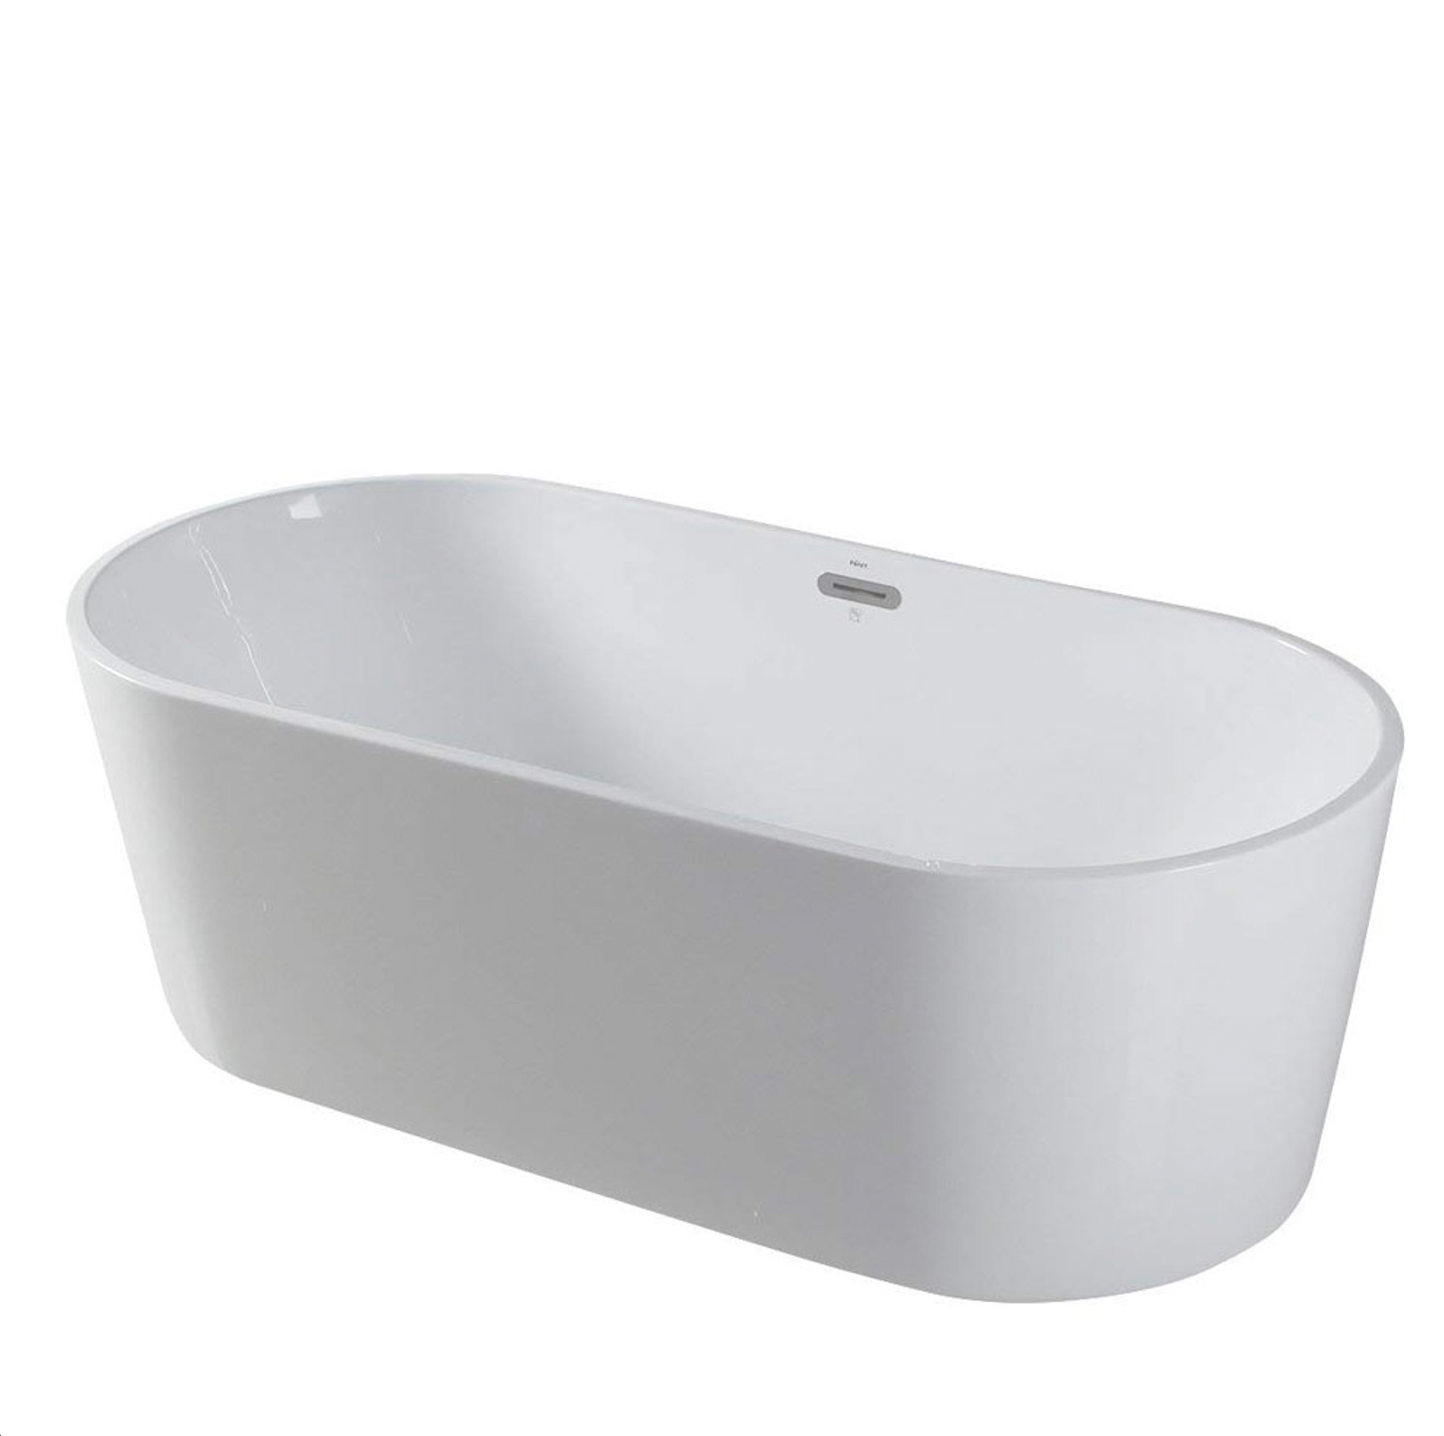 67" Acrylic Oval Double Ended Flatbottom Freestanding Bathtub in Glossy White